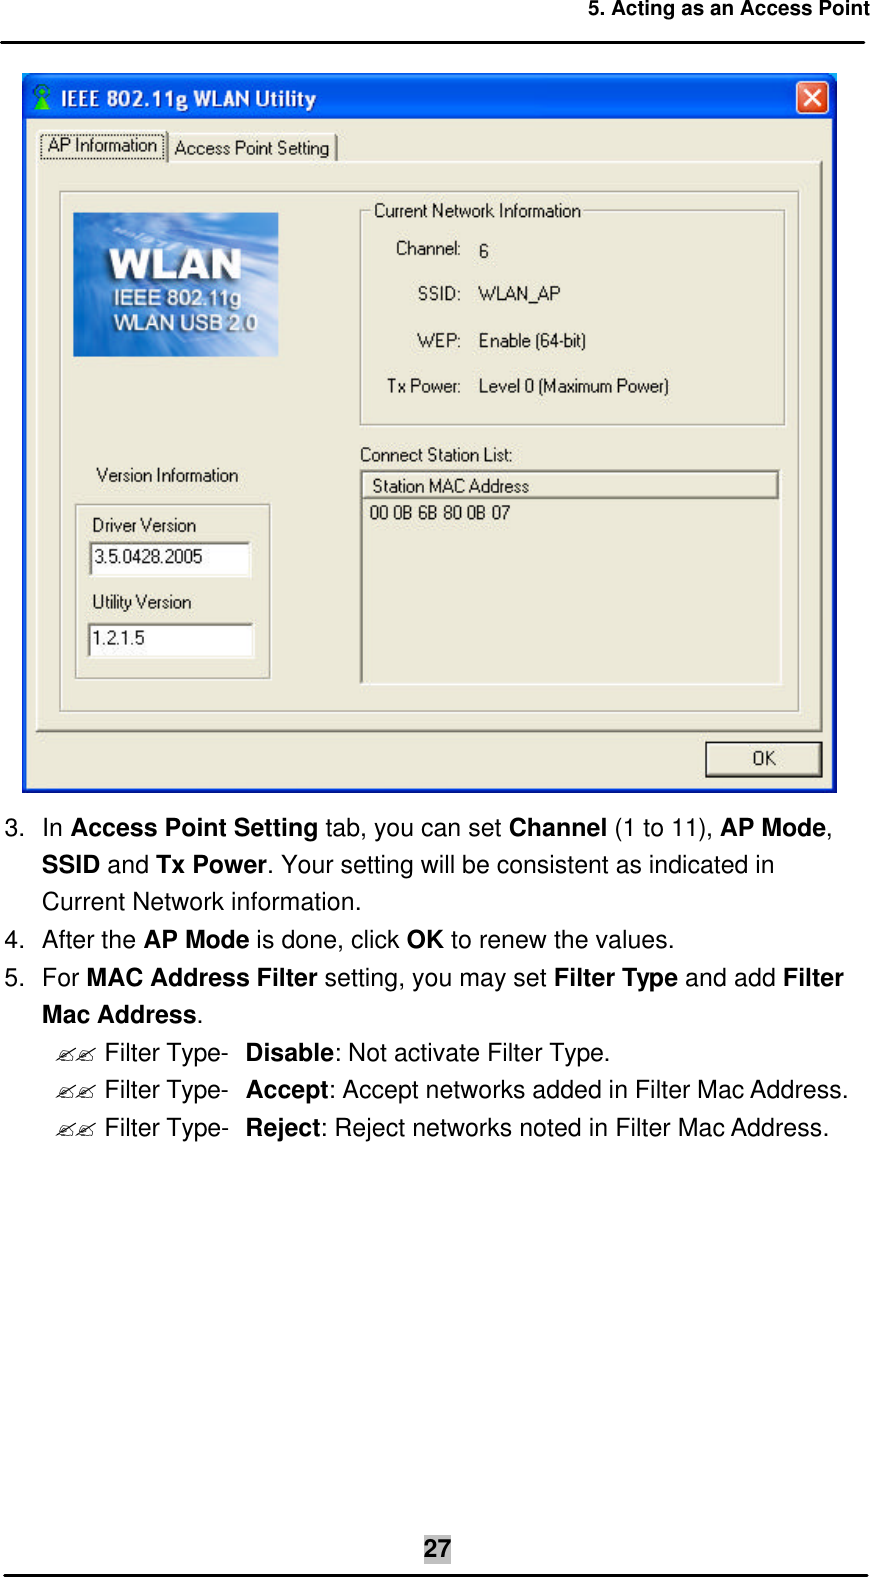 5. Acting as an Access Point  27 3. In Access Point Setting tab, you can set Channel (1 to 11), AP Mode, SSID and Tx Power. Your setting will be consistent as indicated in Current Network information. 4. After the AP Mode is done, click OK to renew the values. 5.  For MAC Address Filter setting, you may set Filter Type and add Filter Mac Address. ?? Filter Type- Disable: Not activate Filter Type. ?? Filter Type- Accept: Accept networks added in Filter Mac Address. ?? Filter Type-  Reject: Reject networks noted in Filter Mac Address. 